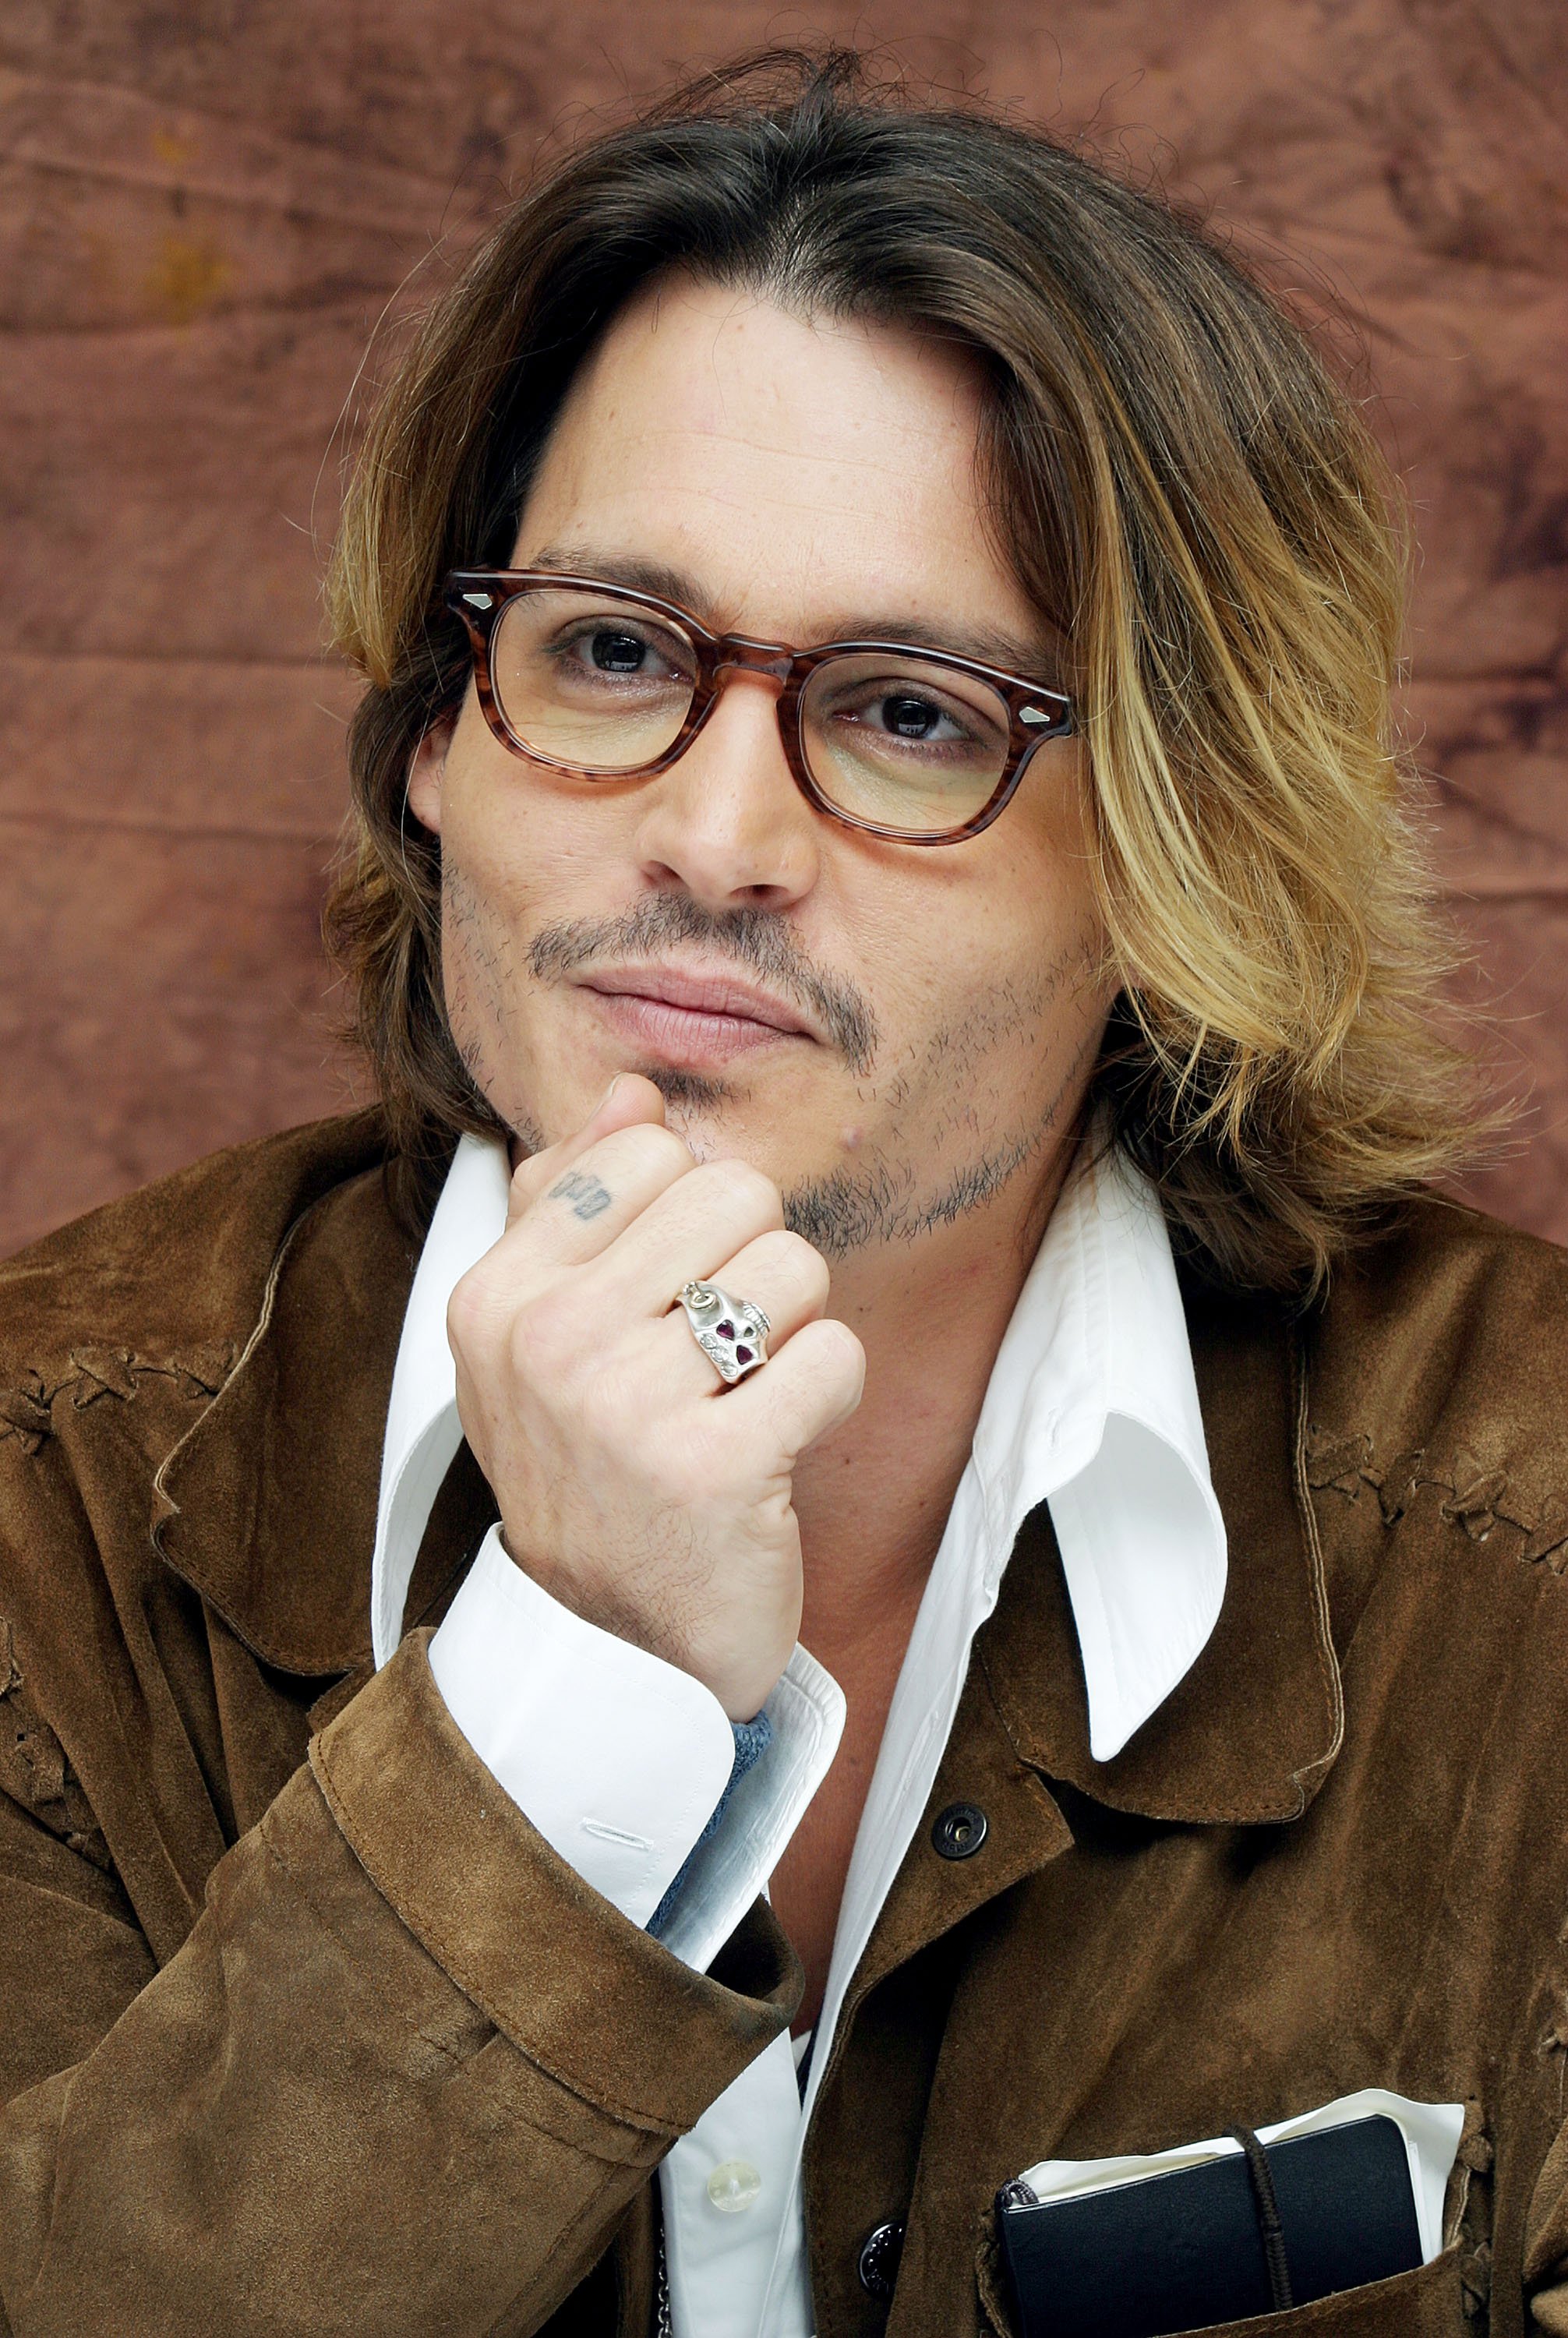 Actor Johnny Depp attends the press conference for his latest film "Once Upon a Time in Mexico" at the Regency Hotel on September 24, 2003 in New York, New York | Source: Getty Images